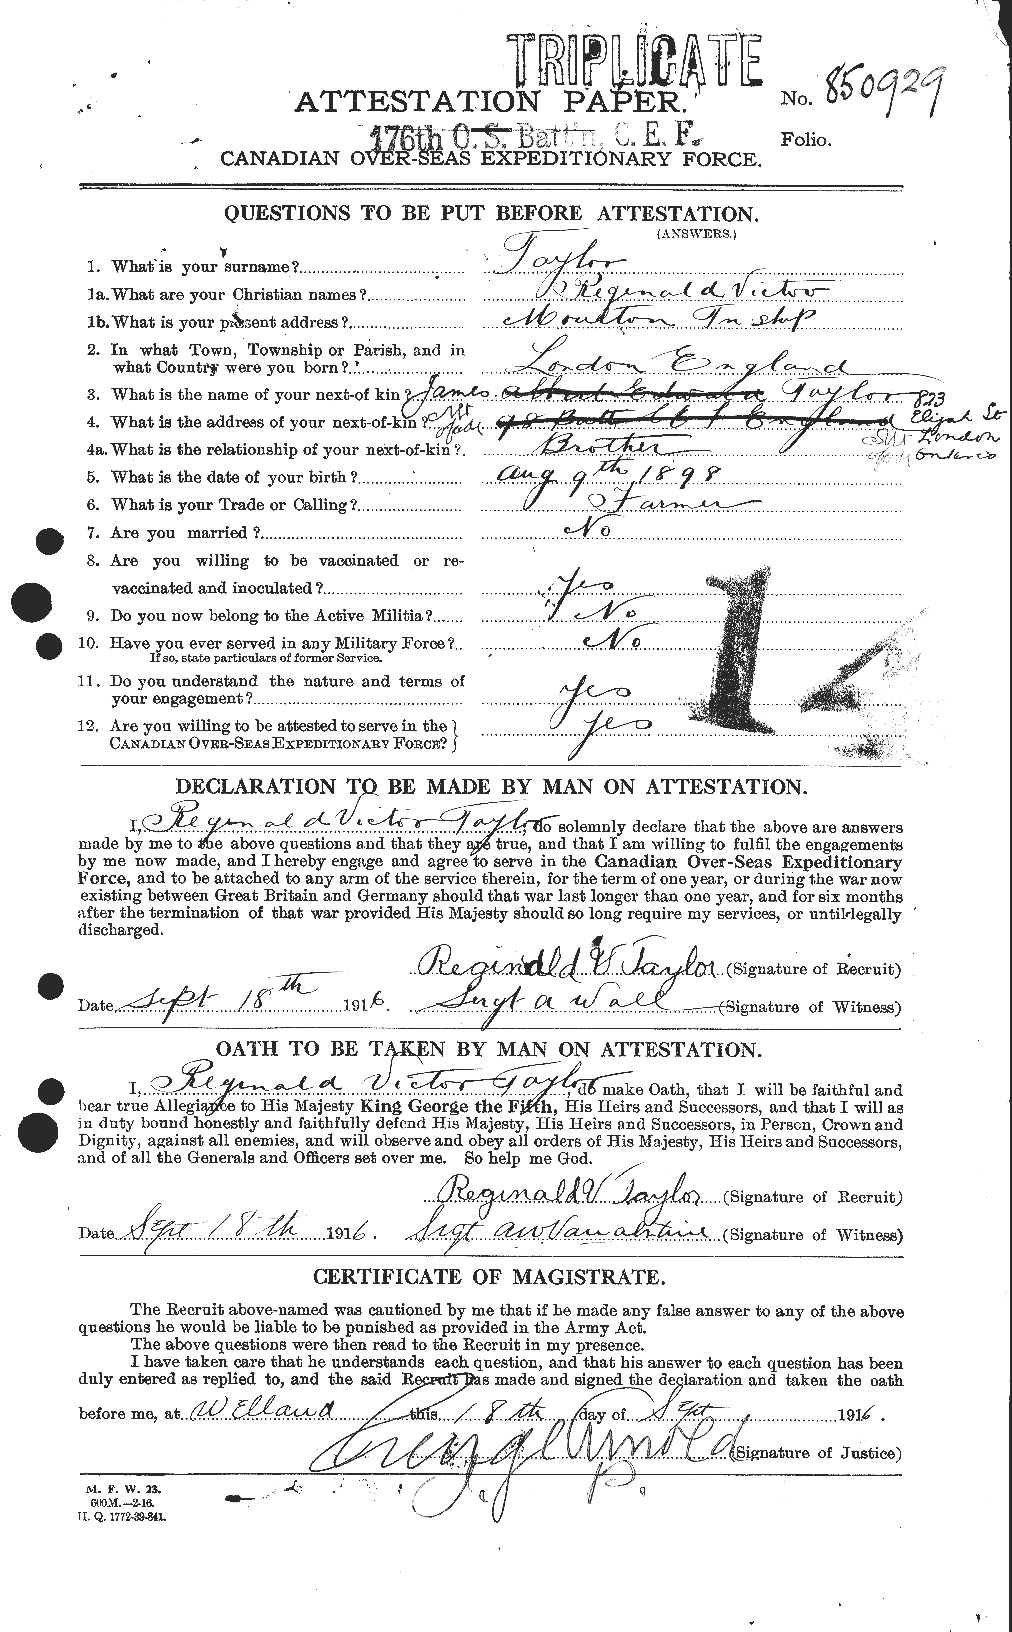 Personnel Records of the First World War - CEF 627807a